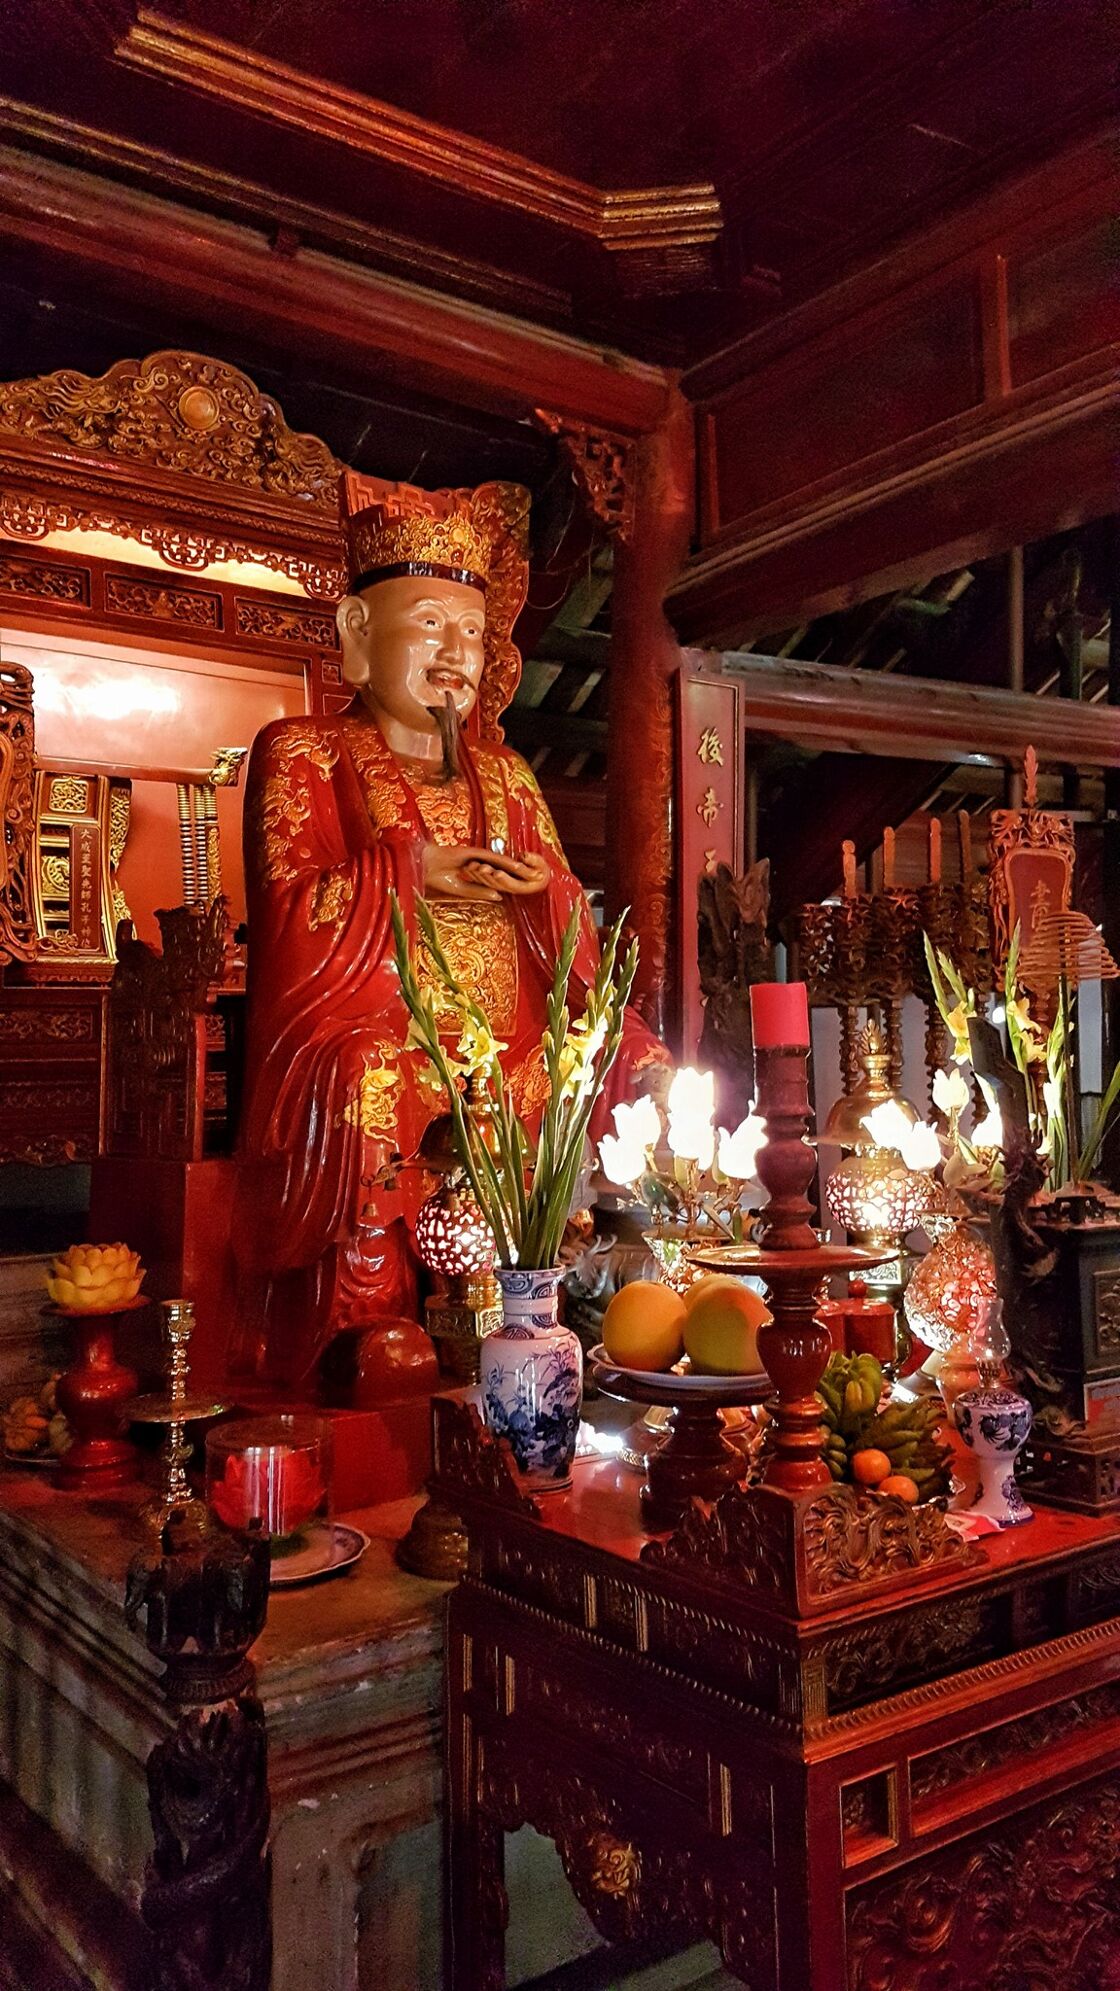 Confucianist altar with flower and fruit offerings at the Temple of Literature in Hanoi.  